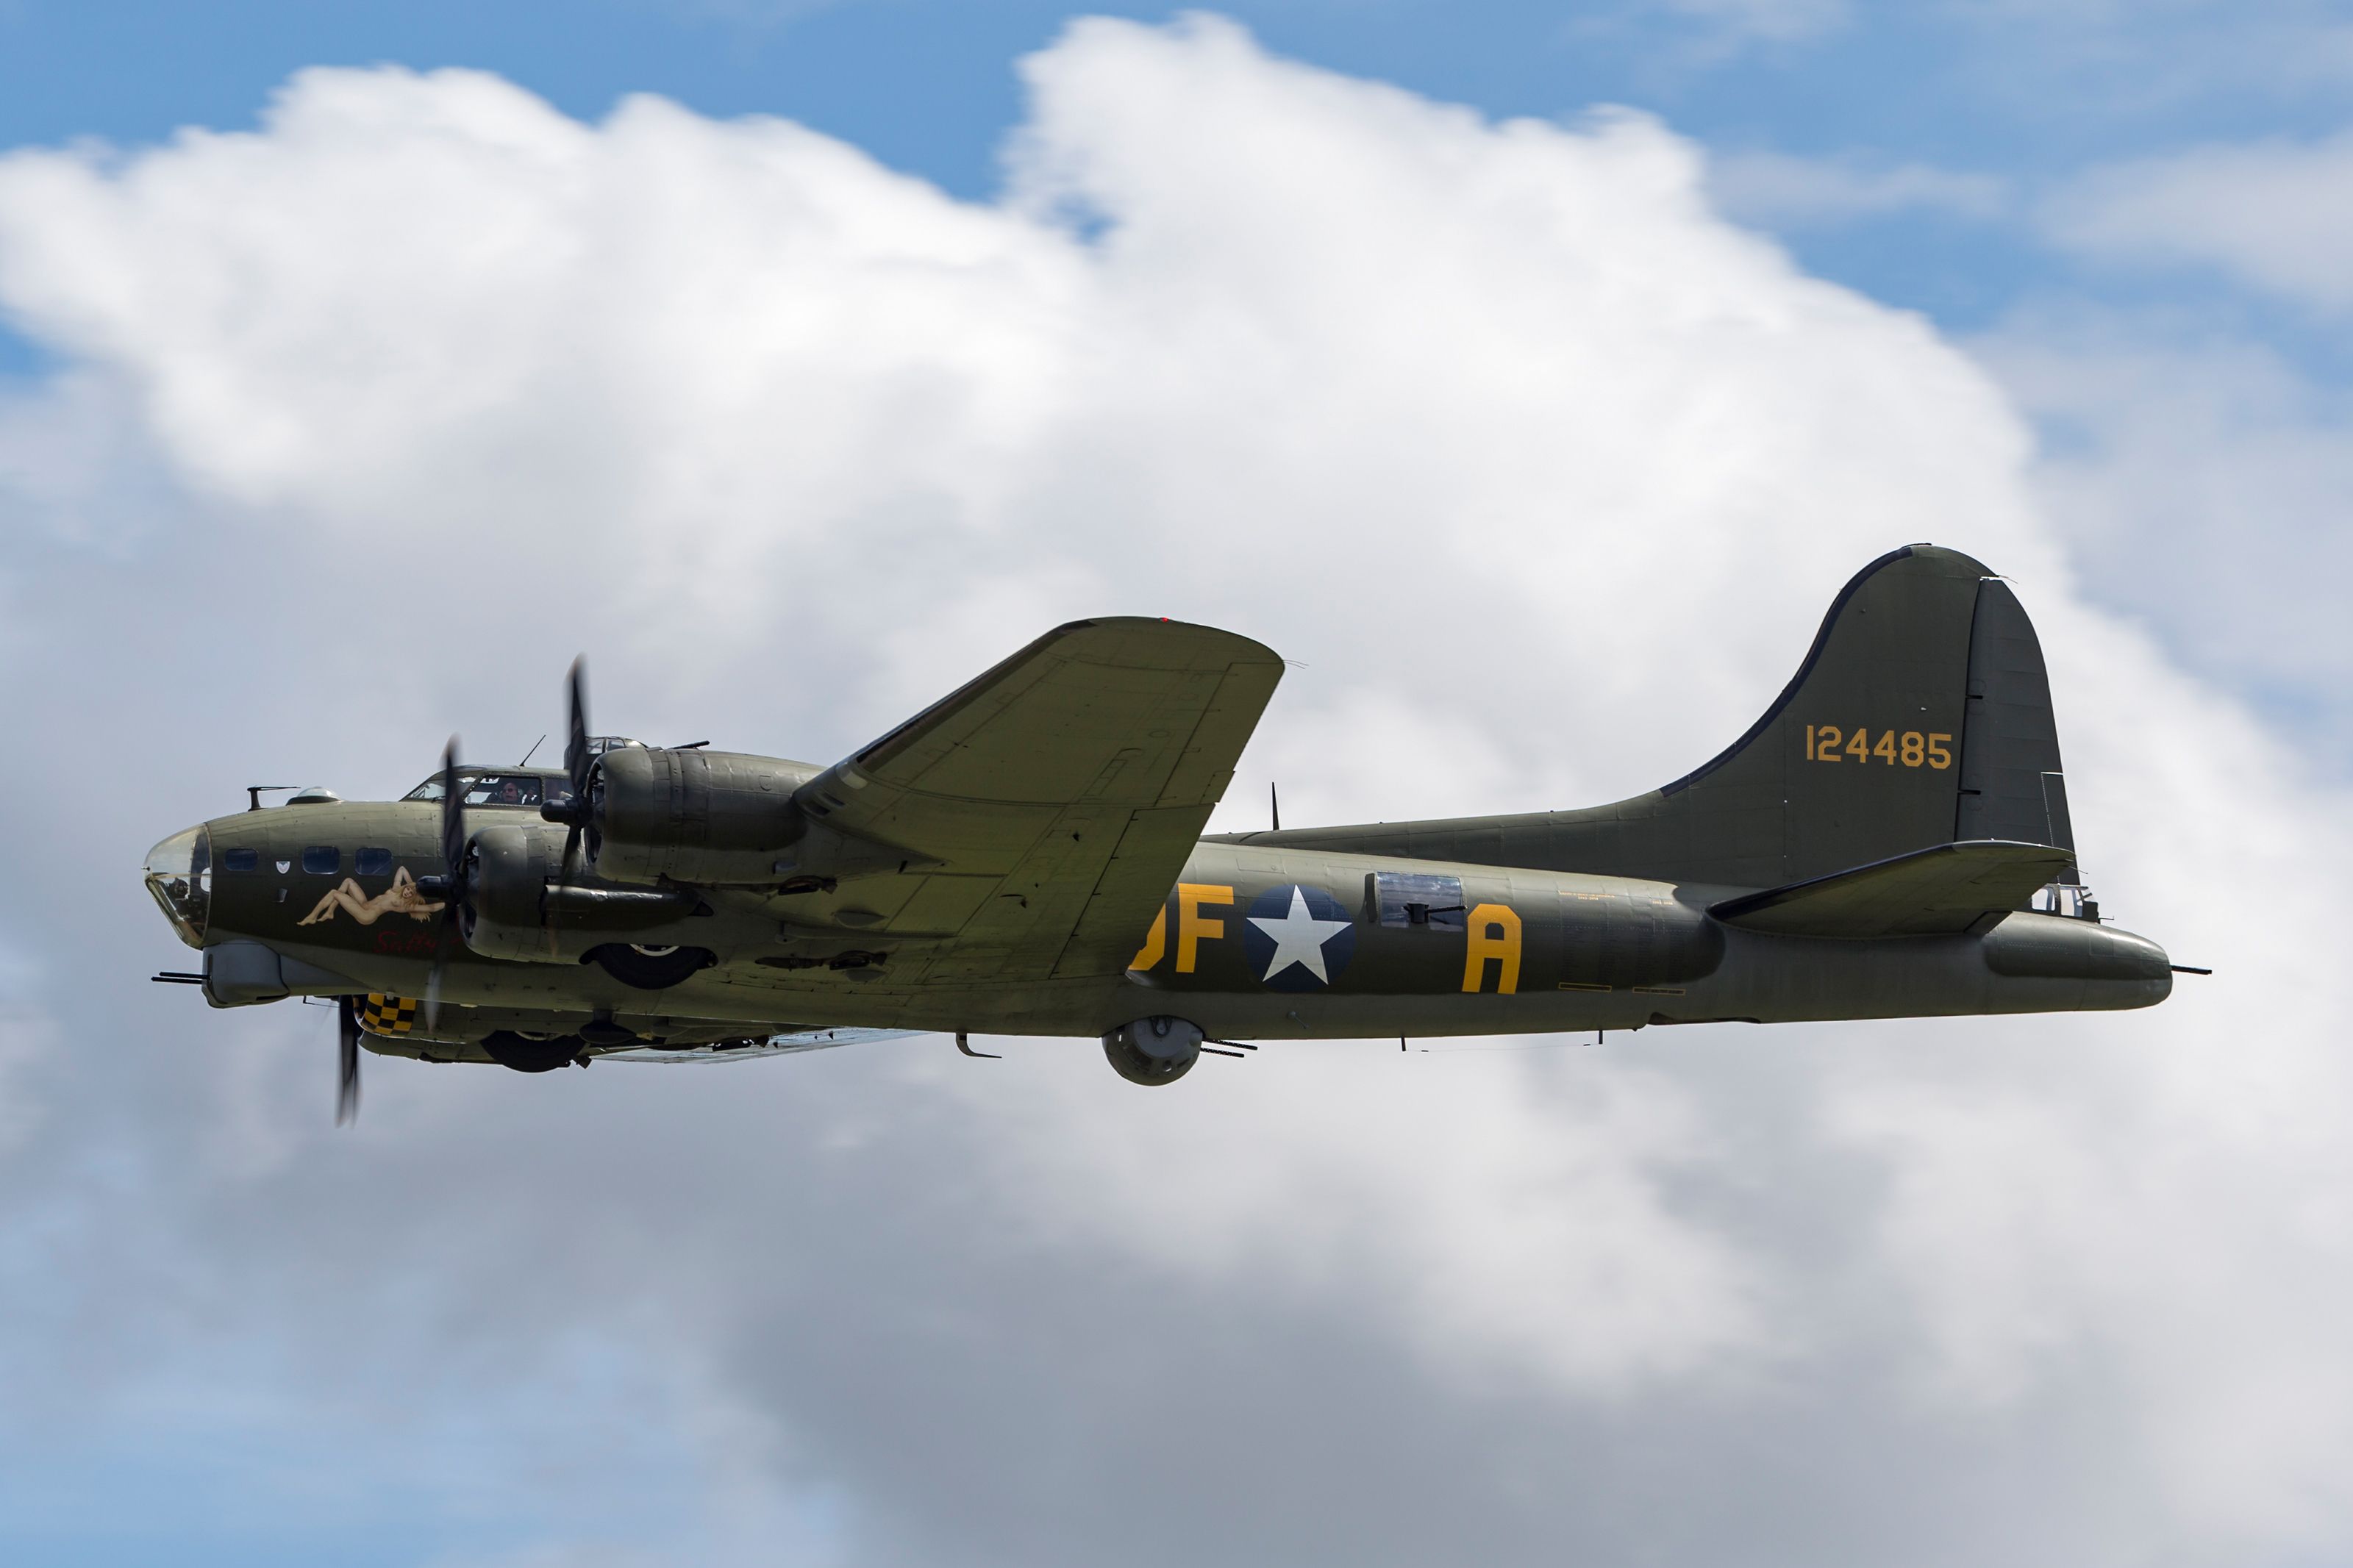 Europe’s Last Boeing B-17 ‘Flying Fortress’ Is Set To Fly Again